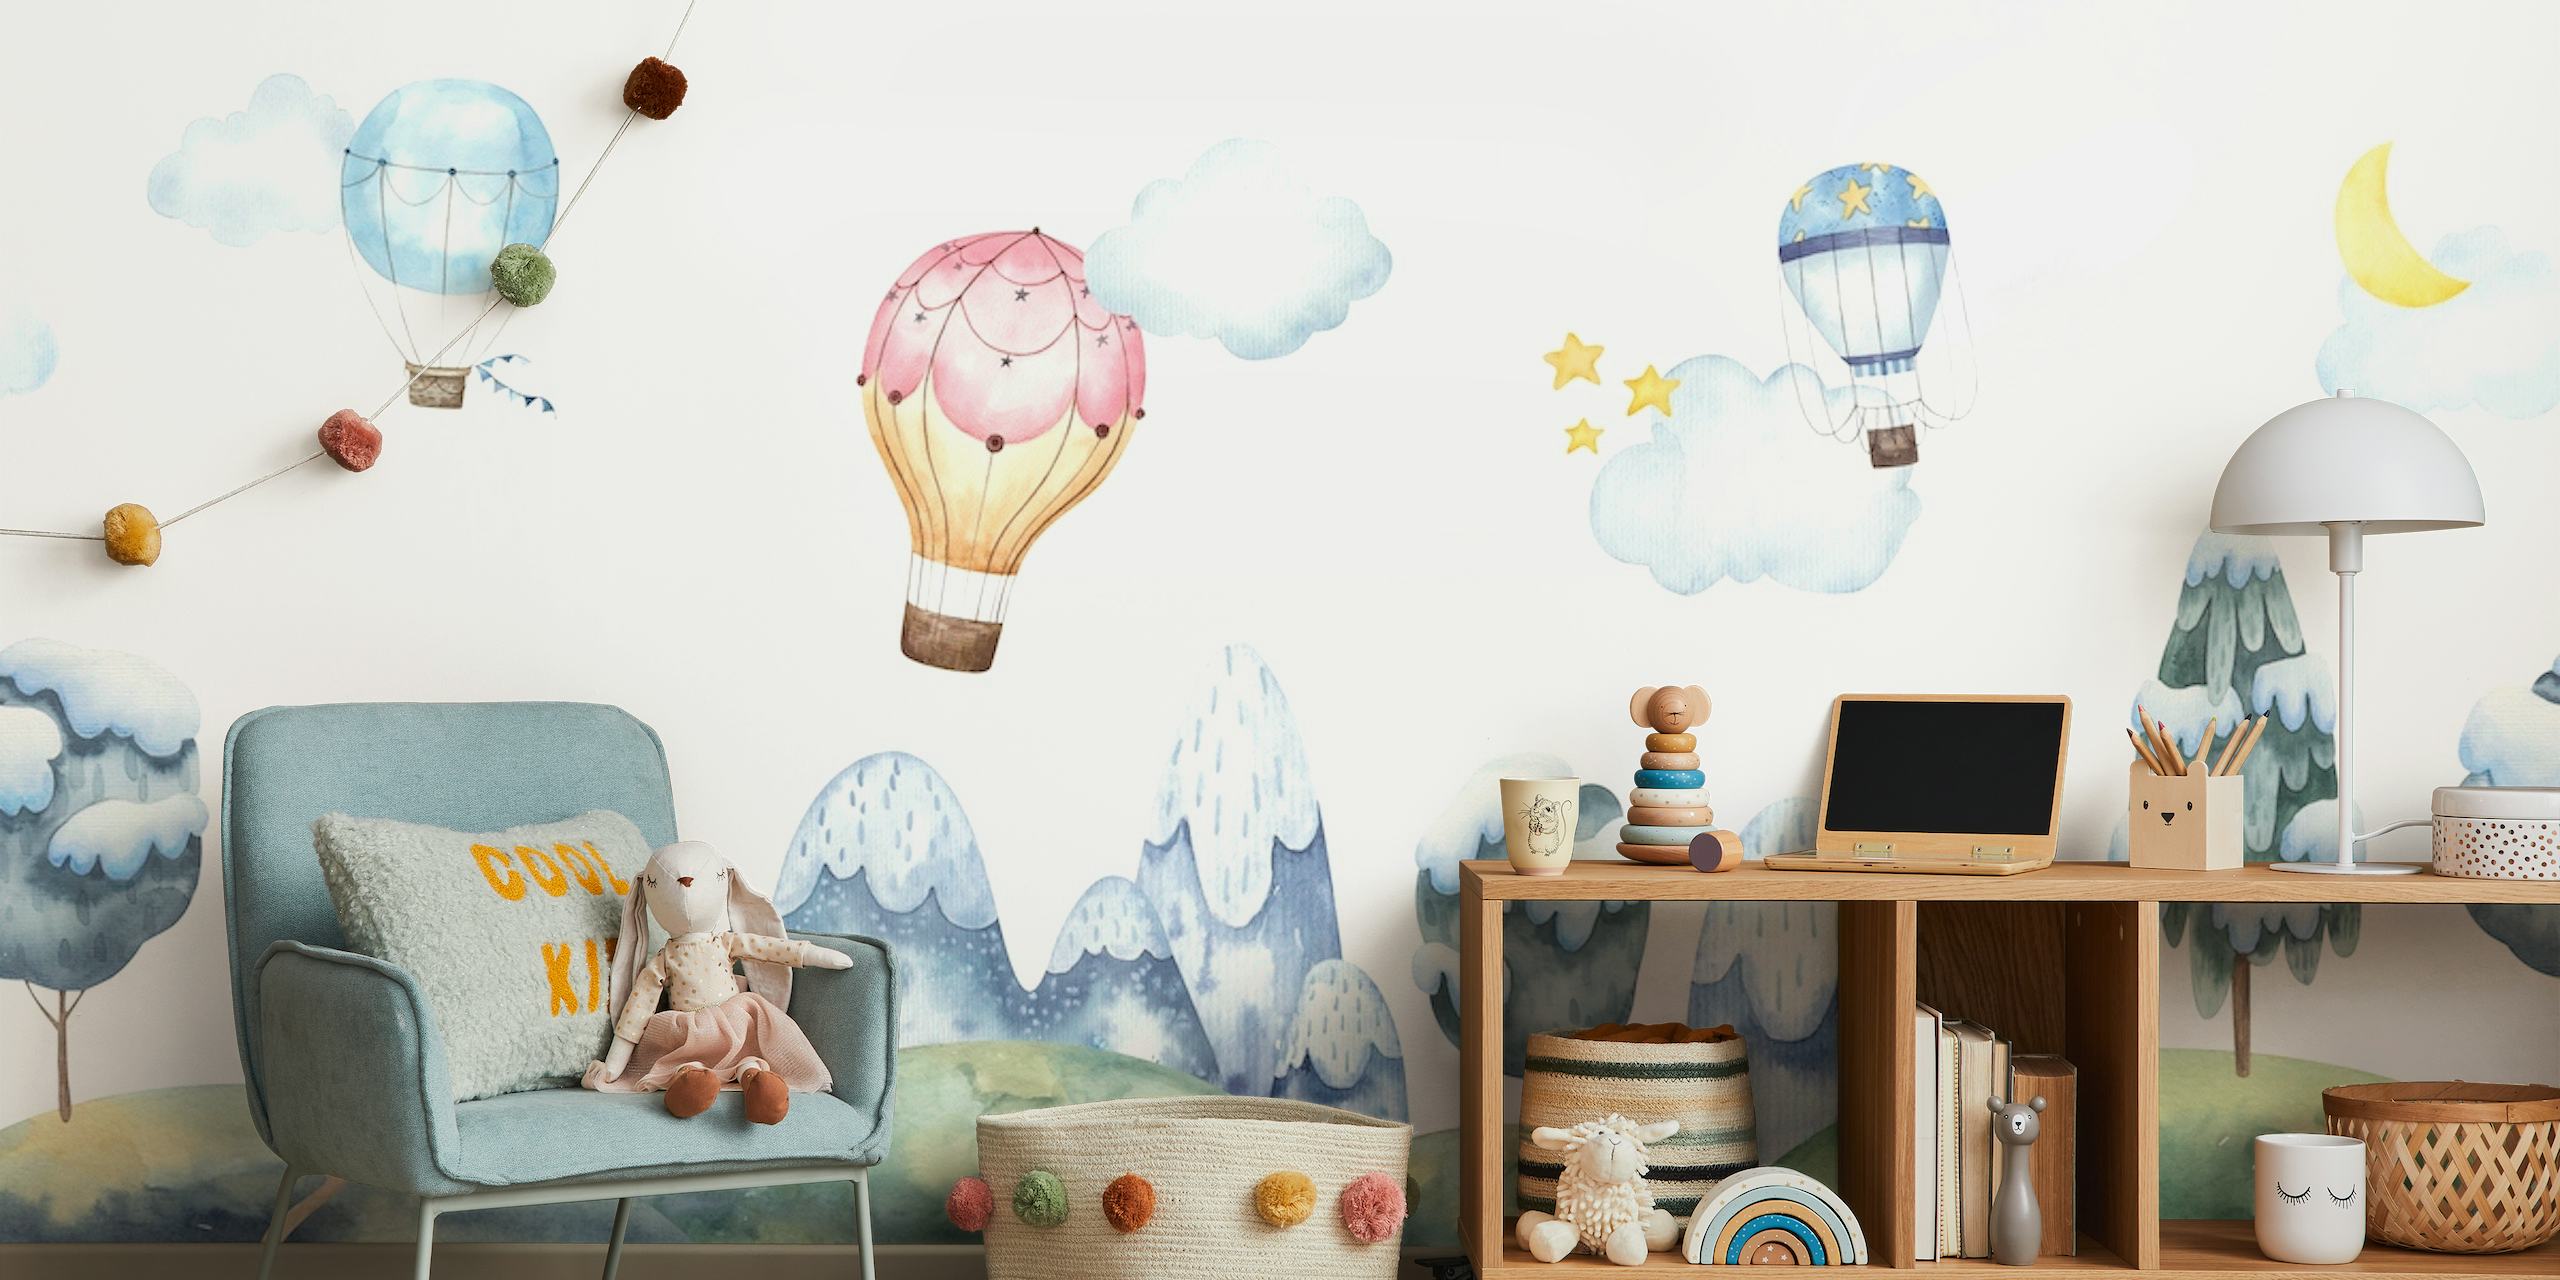 Whimsical air balloons floating above gentle hills and trees wall mural